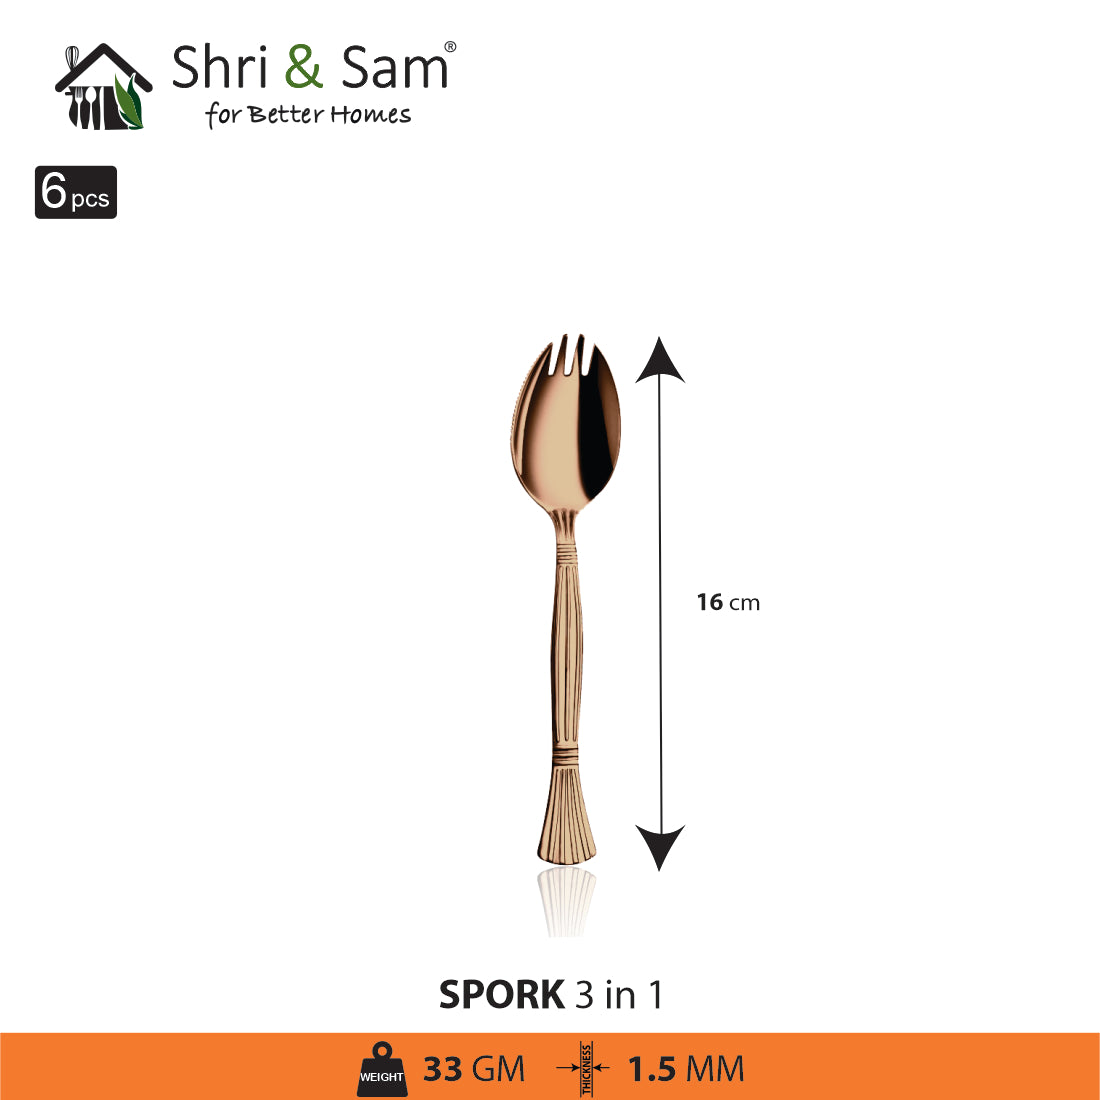 Stainless Steel 6 PCS Cutlery with Rose Gold PVD Coating Spork 3 IN 1